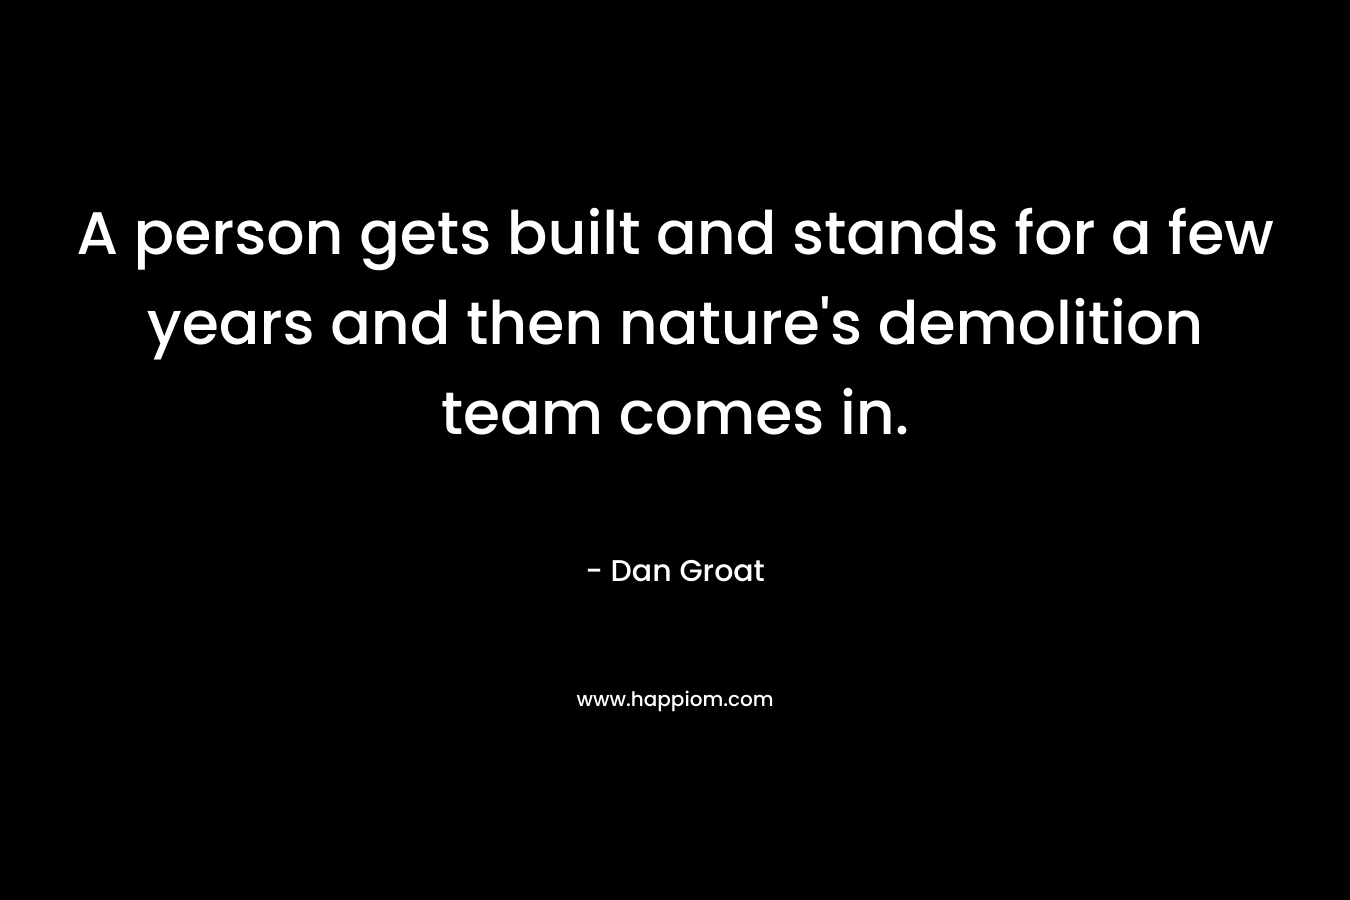 A person gets built and stands for a few years and then nature’s demolition team comes in. – Dan Groat